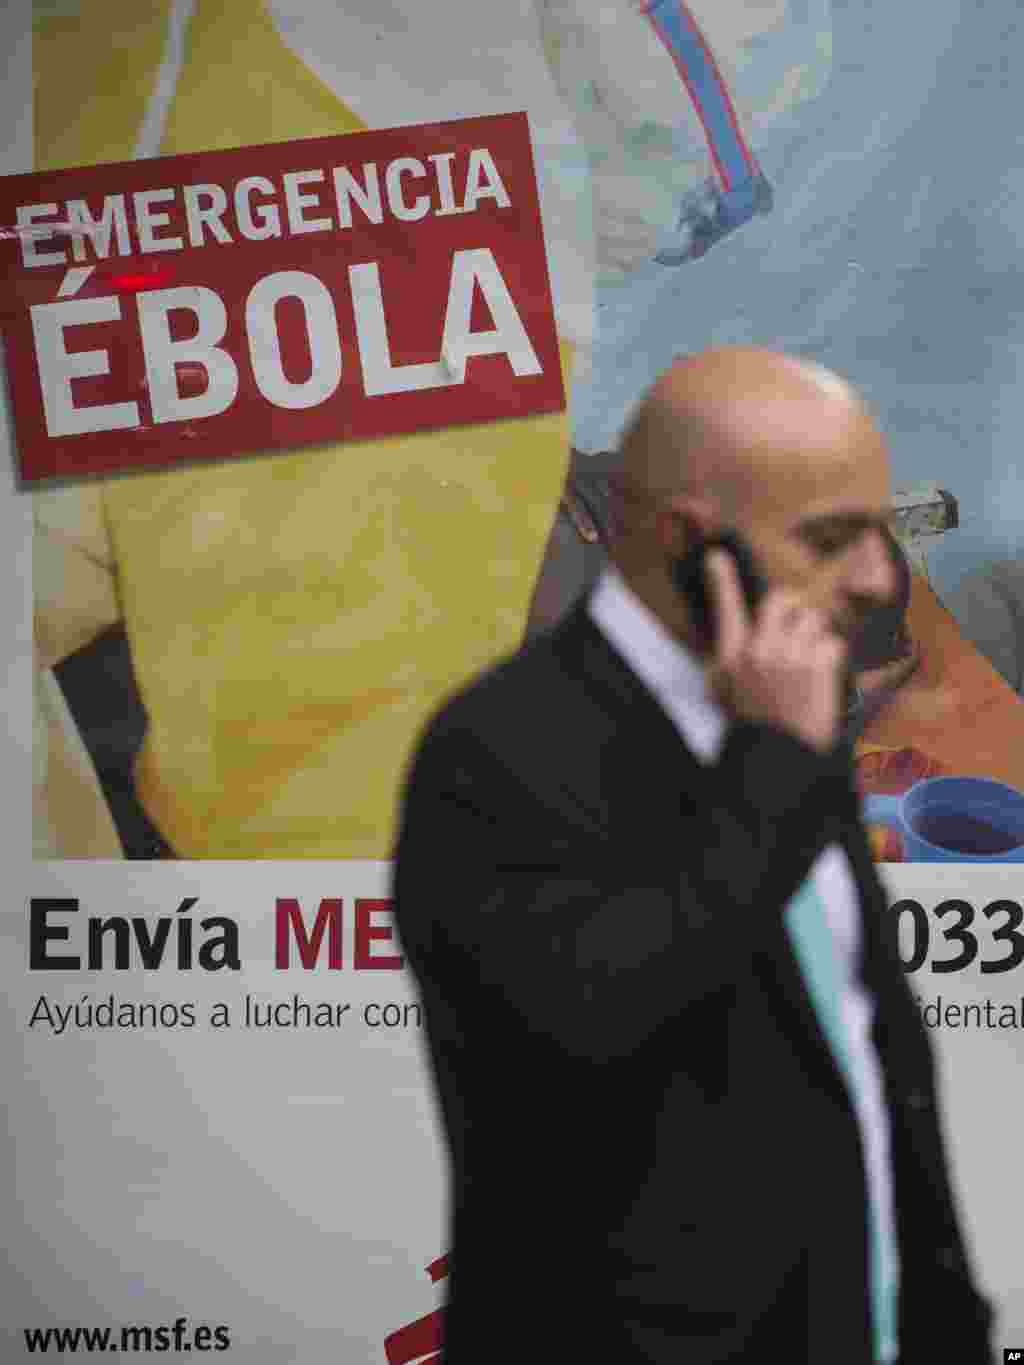 A man walks past a billboard that makes an appeal for financial help to fight Ebola in Africa, Madrid, Spain, Oct. 10, 2014. 